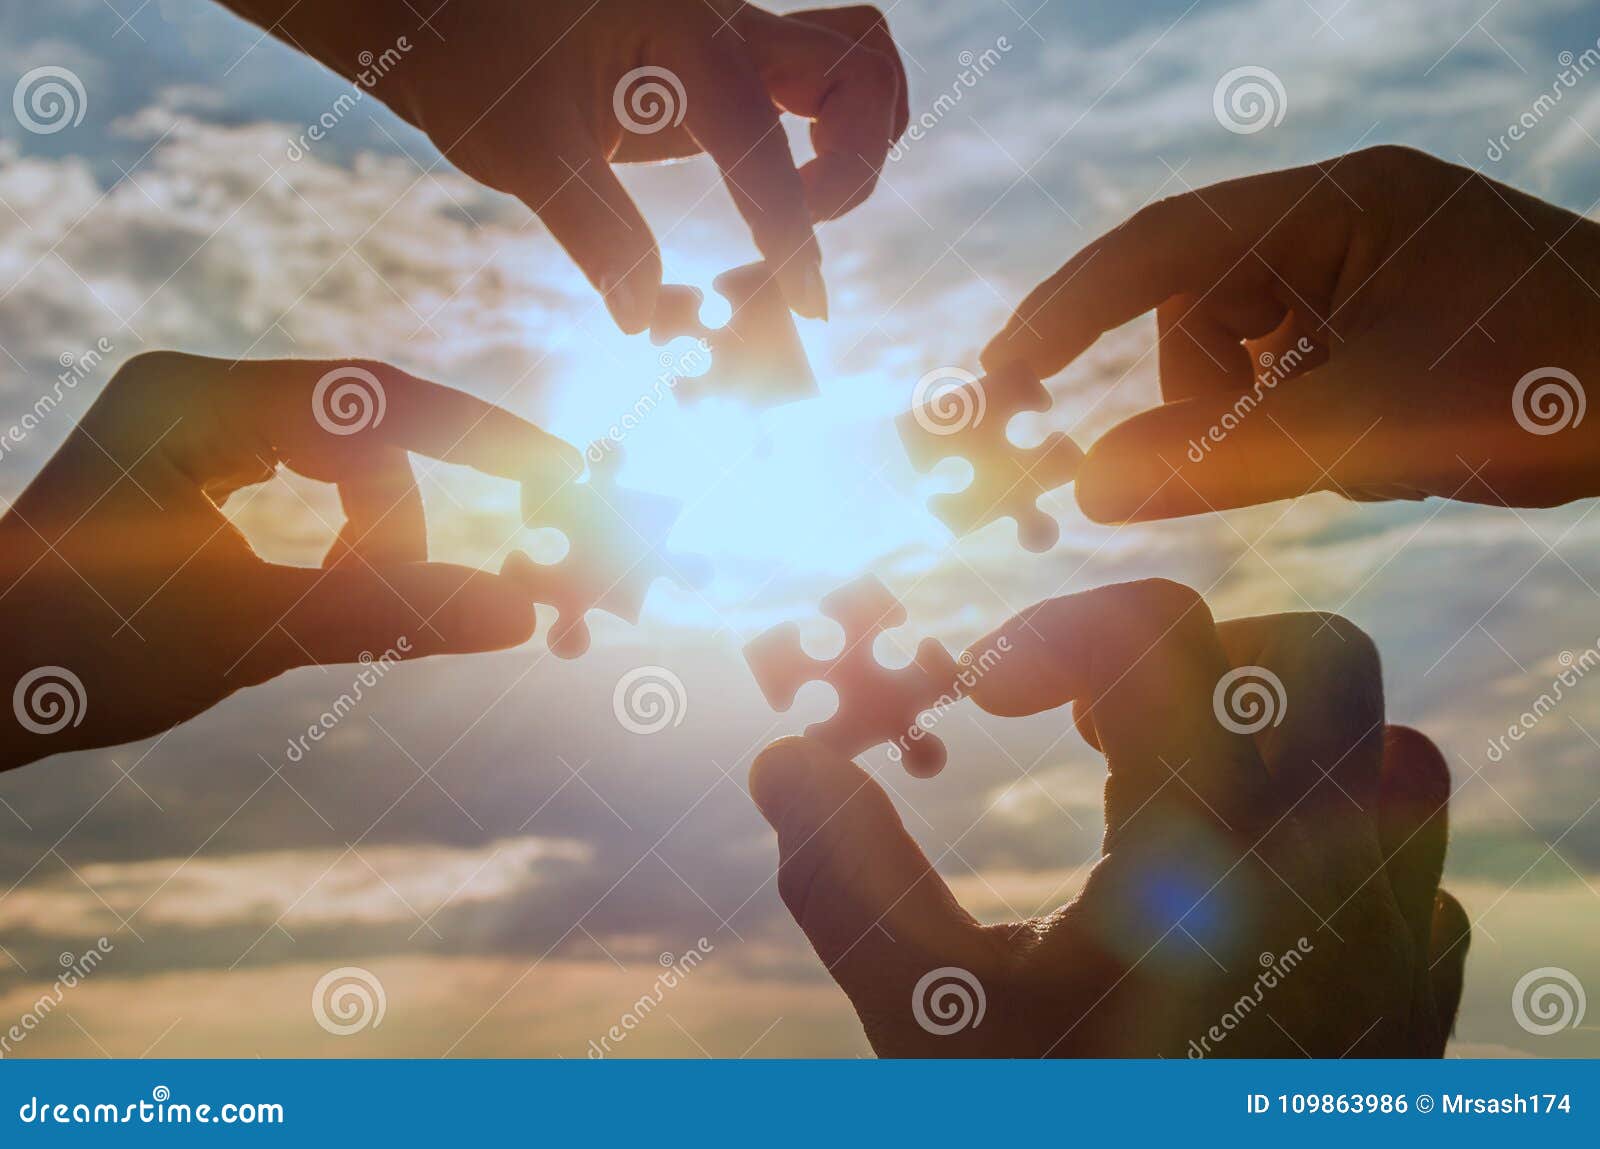 collaborate four hands trying to connect a puzzle piece with a sunset background.